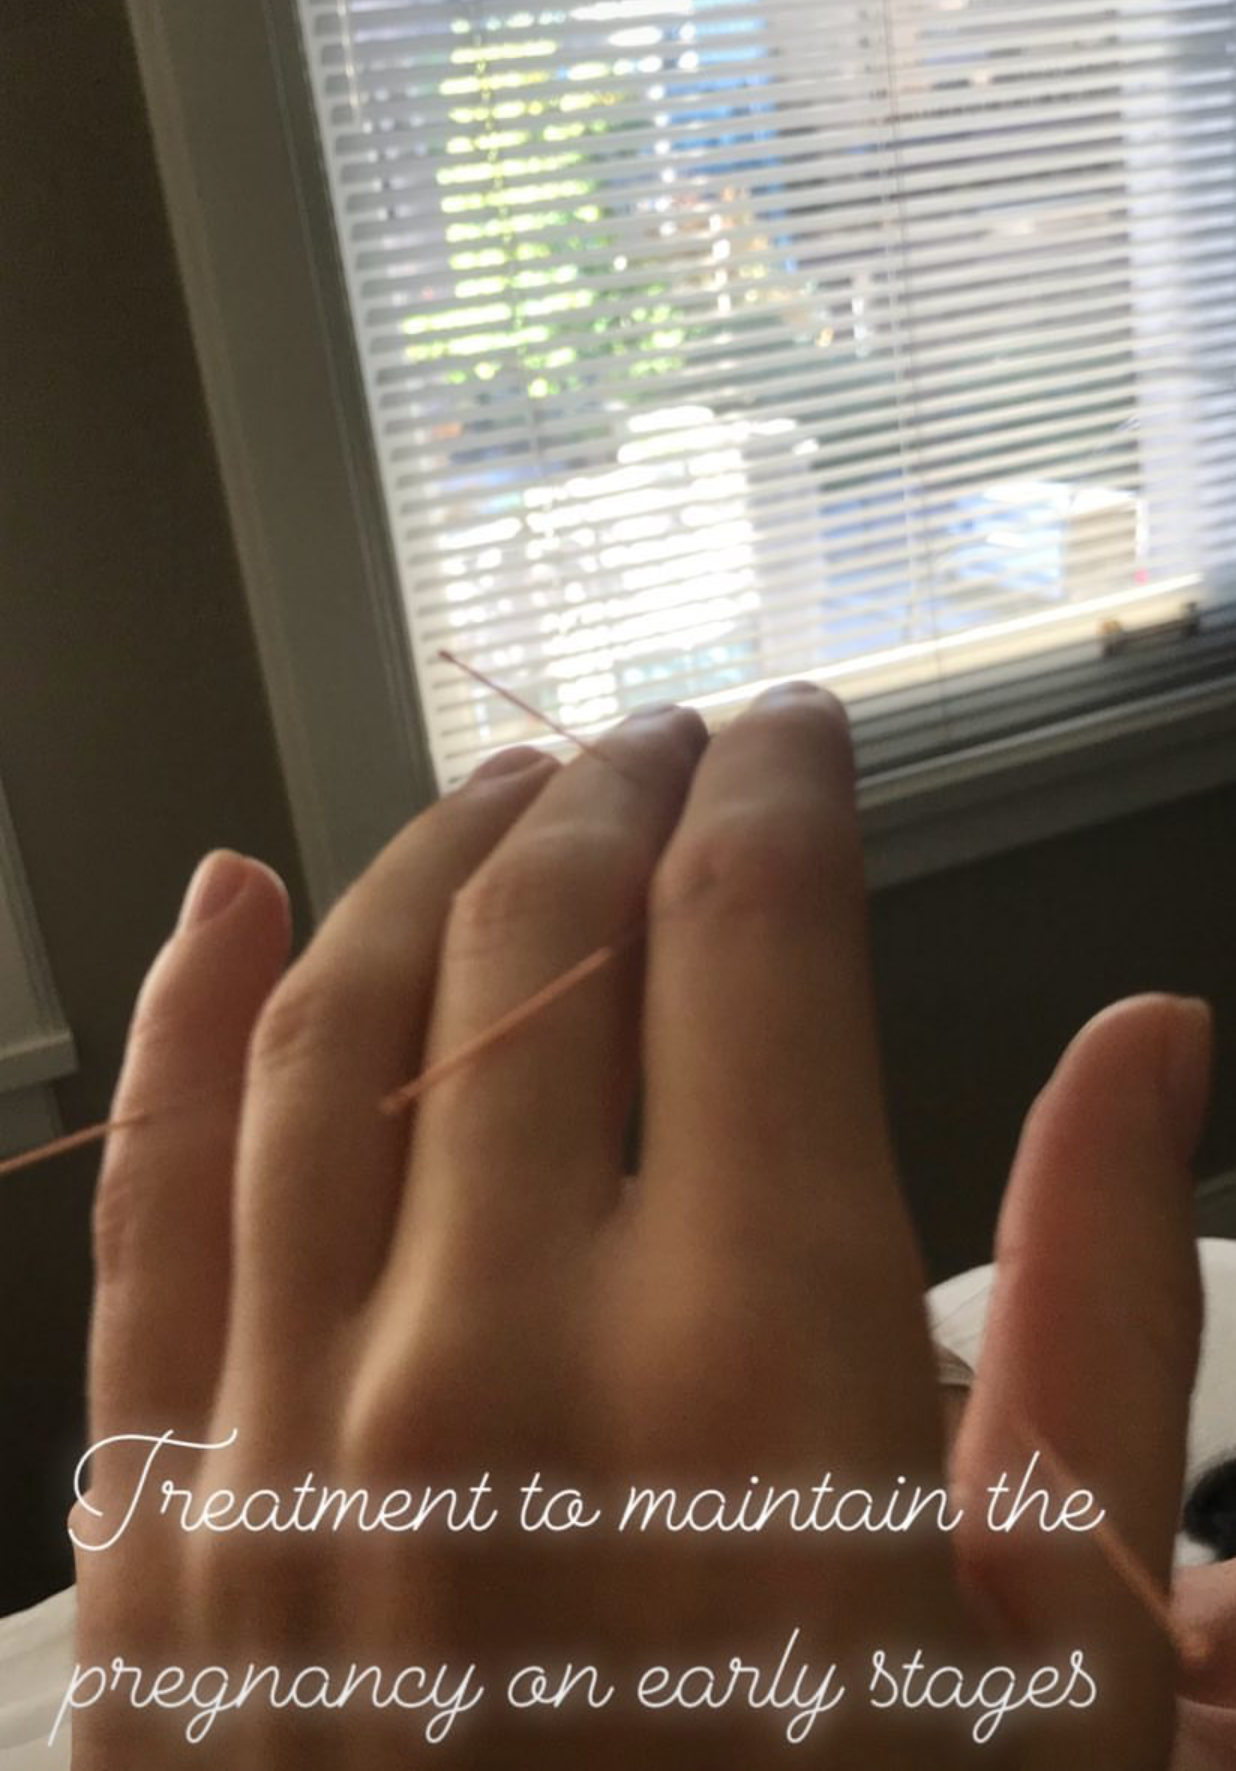  SuJok acupuncture treatments based in Vancouver used for fertility and reproductive health. Patient is treated to maintain pregnancy in first stages.  